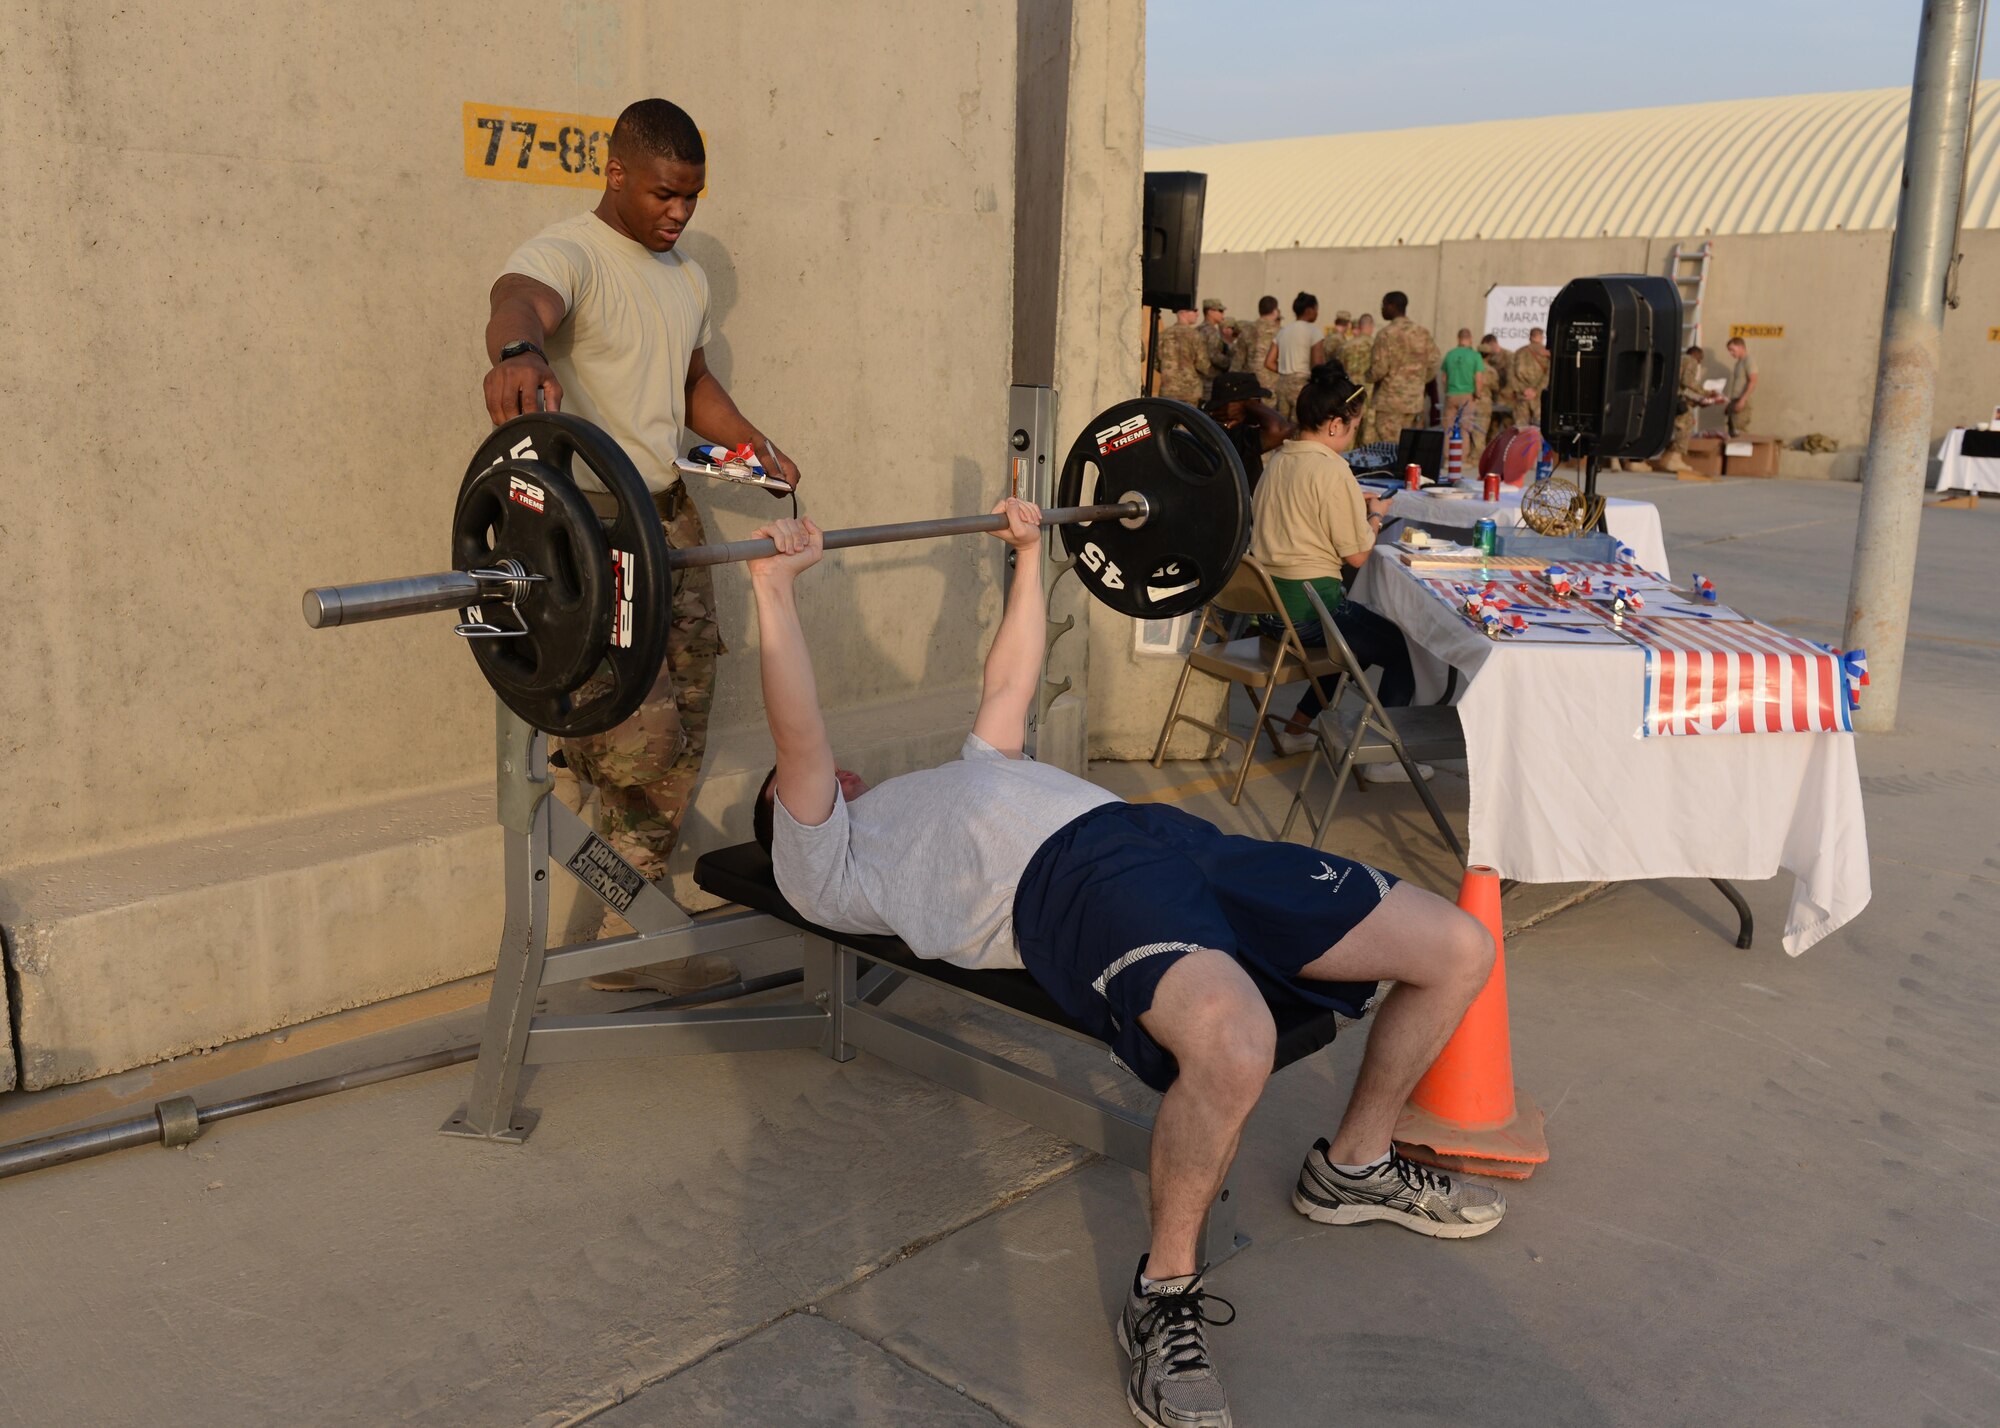 U.S. Air Force Senior Airman Kionne Lewis, 455th Expeditionary Logistics Readiness Squadron cargo movement specialist, spots an Airman during a bench press challenge at the Air Force birthday celebration Sept. 18, 2015, at Bagram Airfield, Afghanistan. The block party which was hosted by the Armed Forces Committed to Excellence council, the 455th Force Support Squadron and other private organizations featured games, food and a traditional AF cake cutting ceremony. (U.S. Air Force photo by Senior Airman Cierra Presentado/Released)